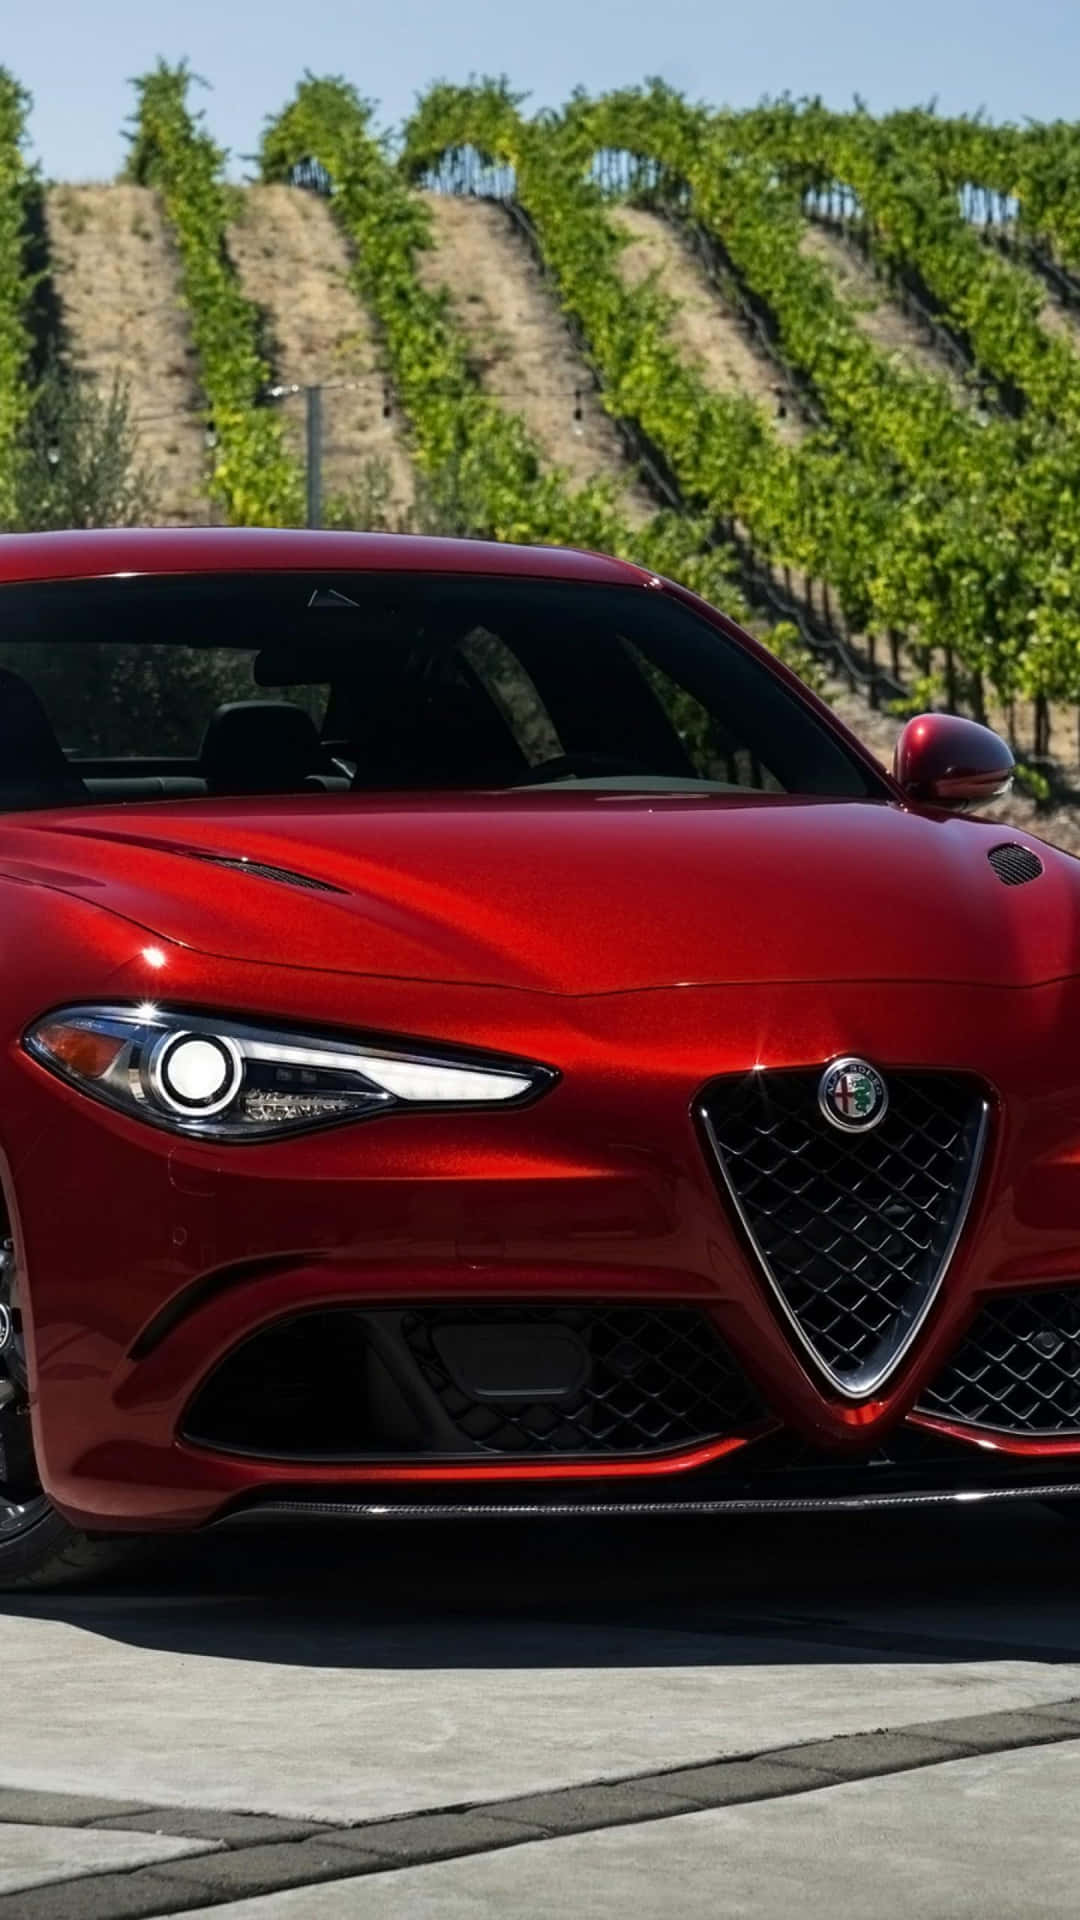 Step Into the Age of Elegance and Power with Alfa Romeo